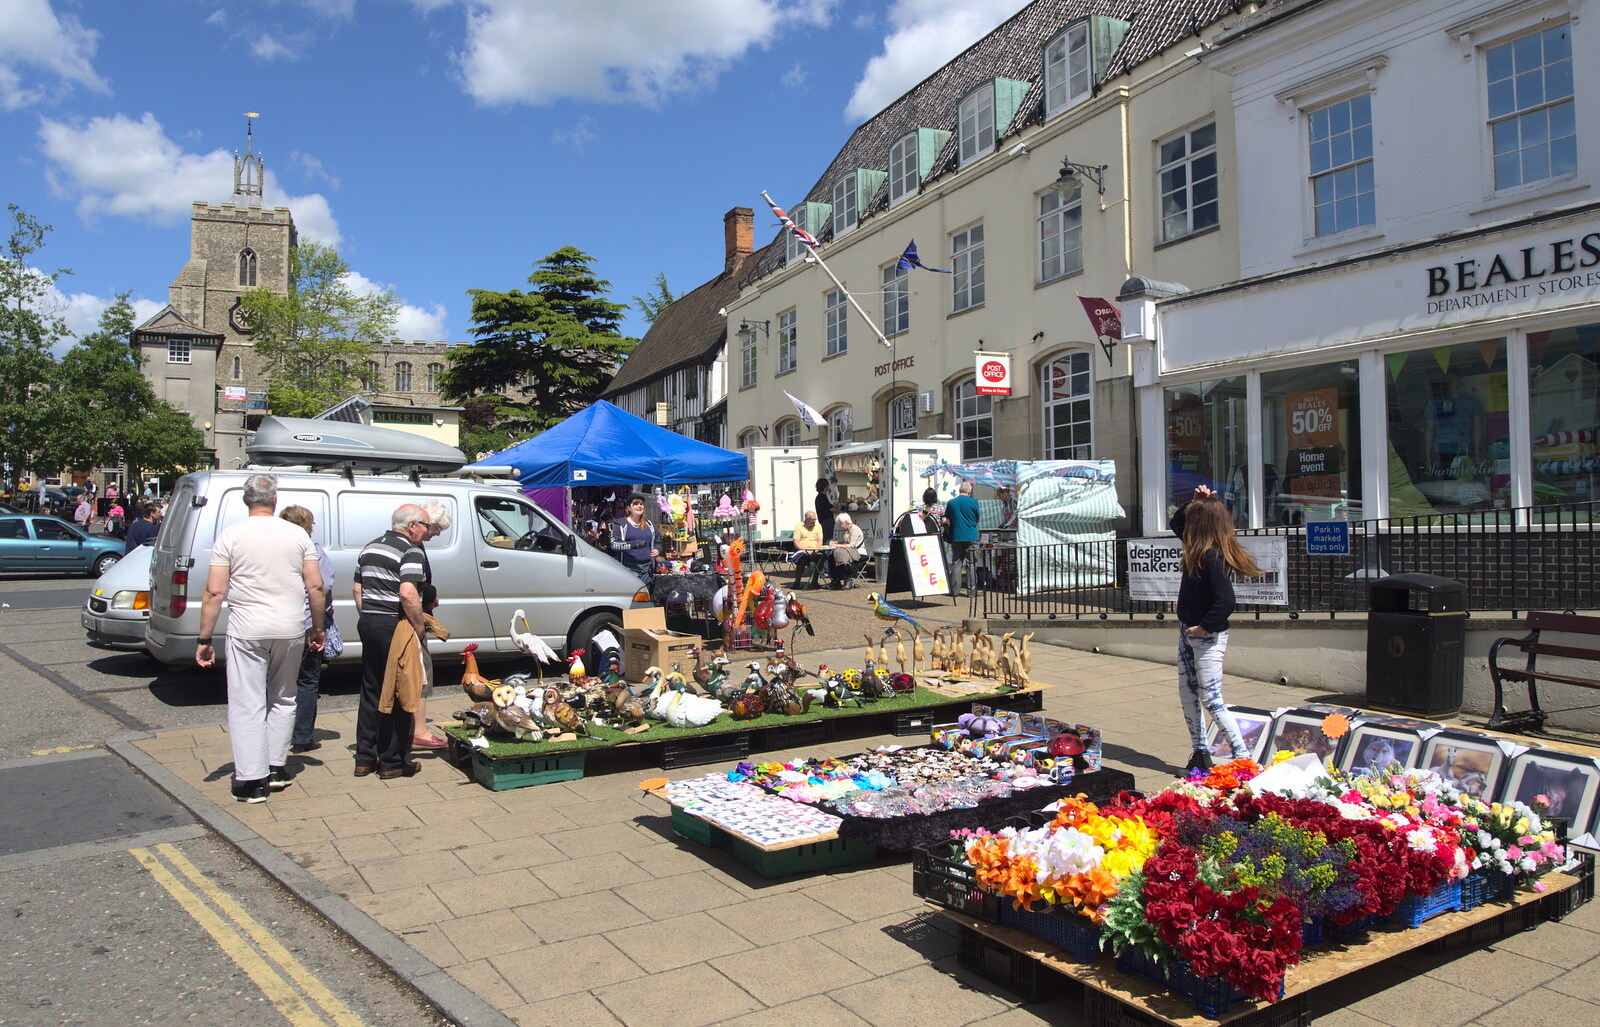 Flowers in the Market Place from The Diss Organ Festival, Diss, Norfolk - 14th May 2017